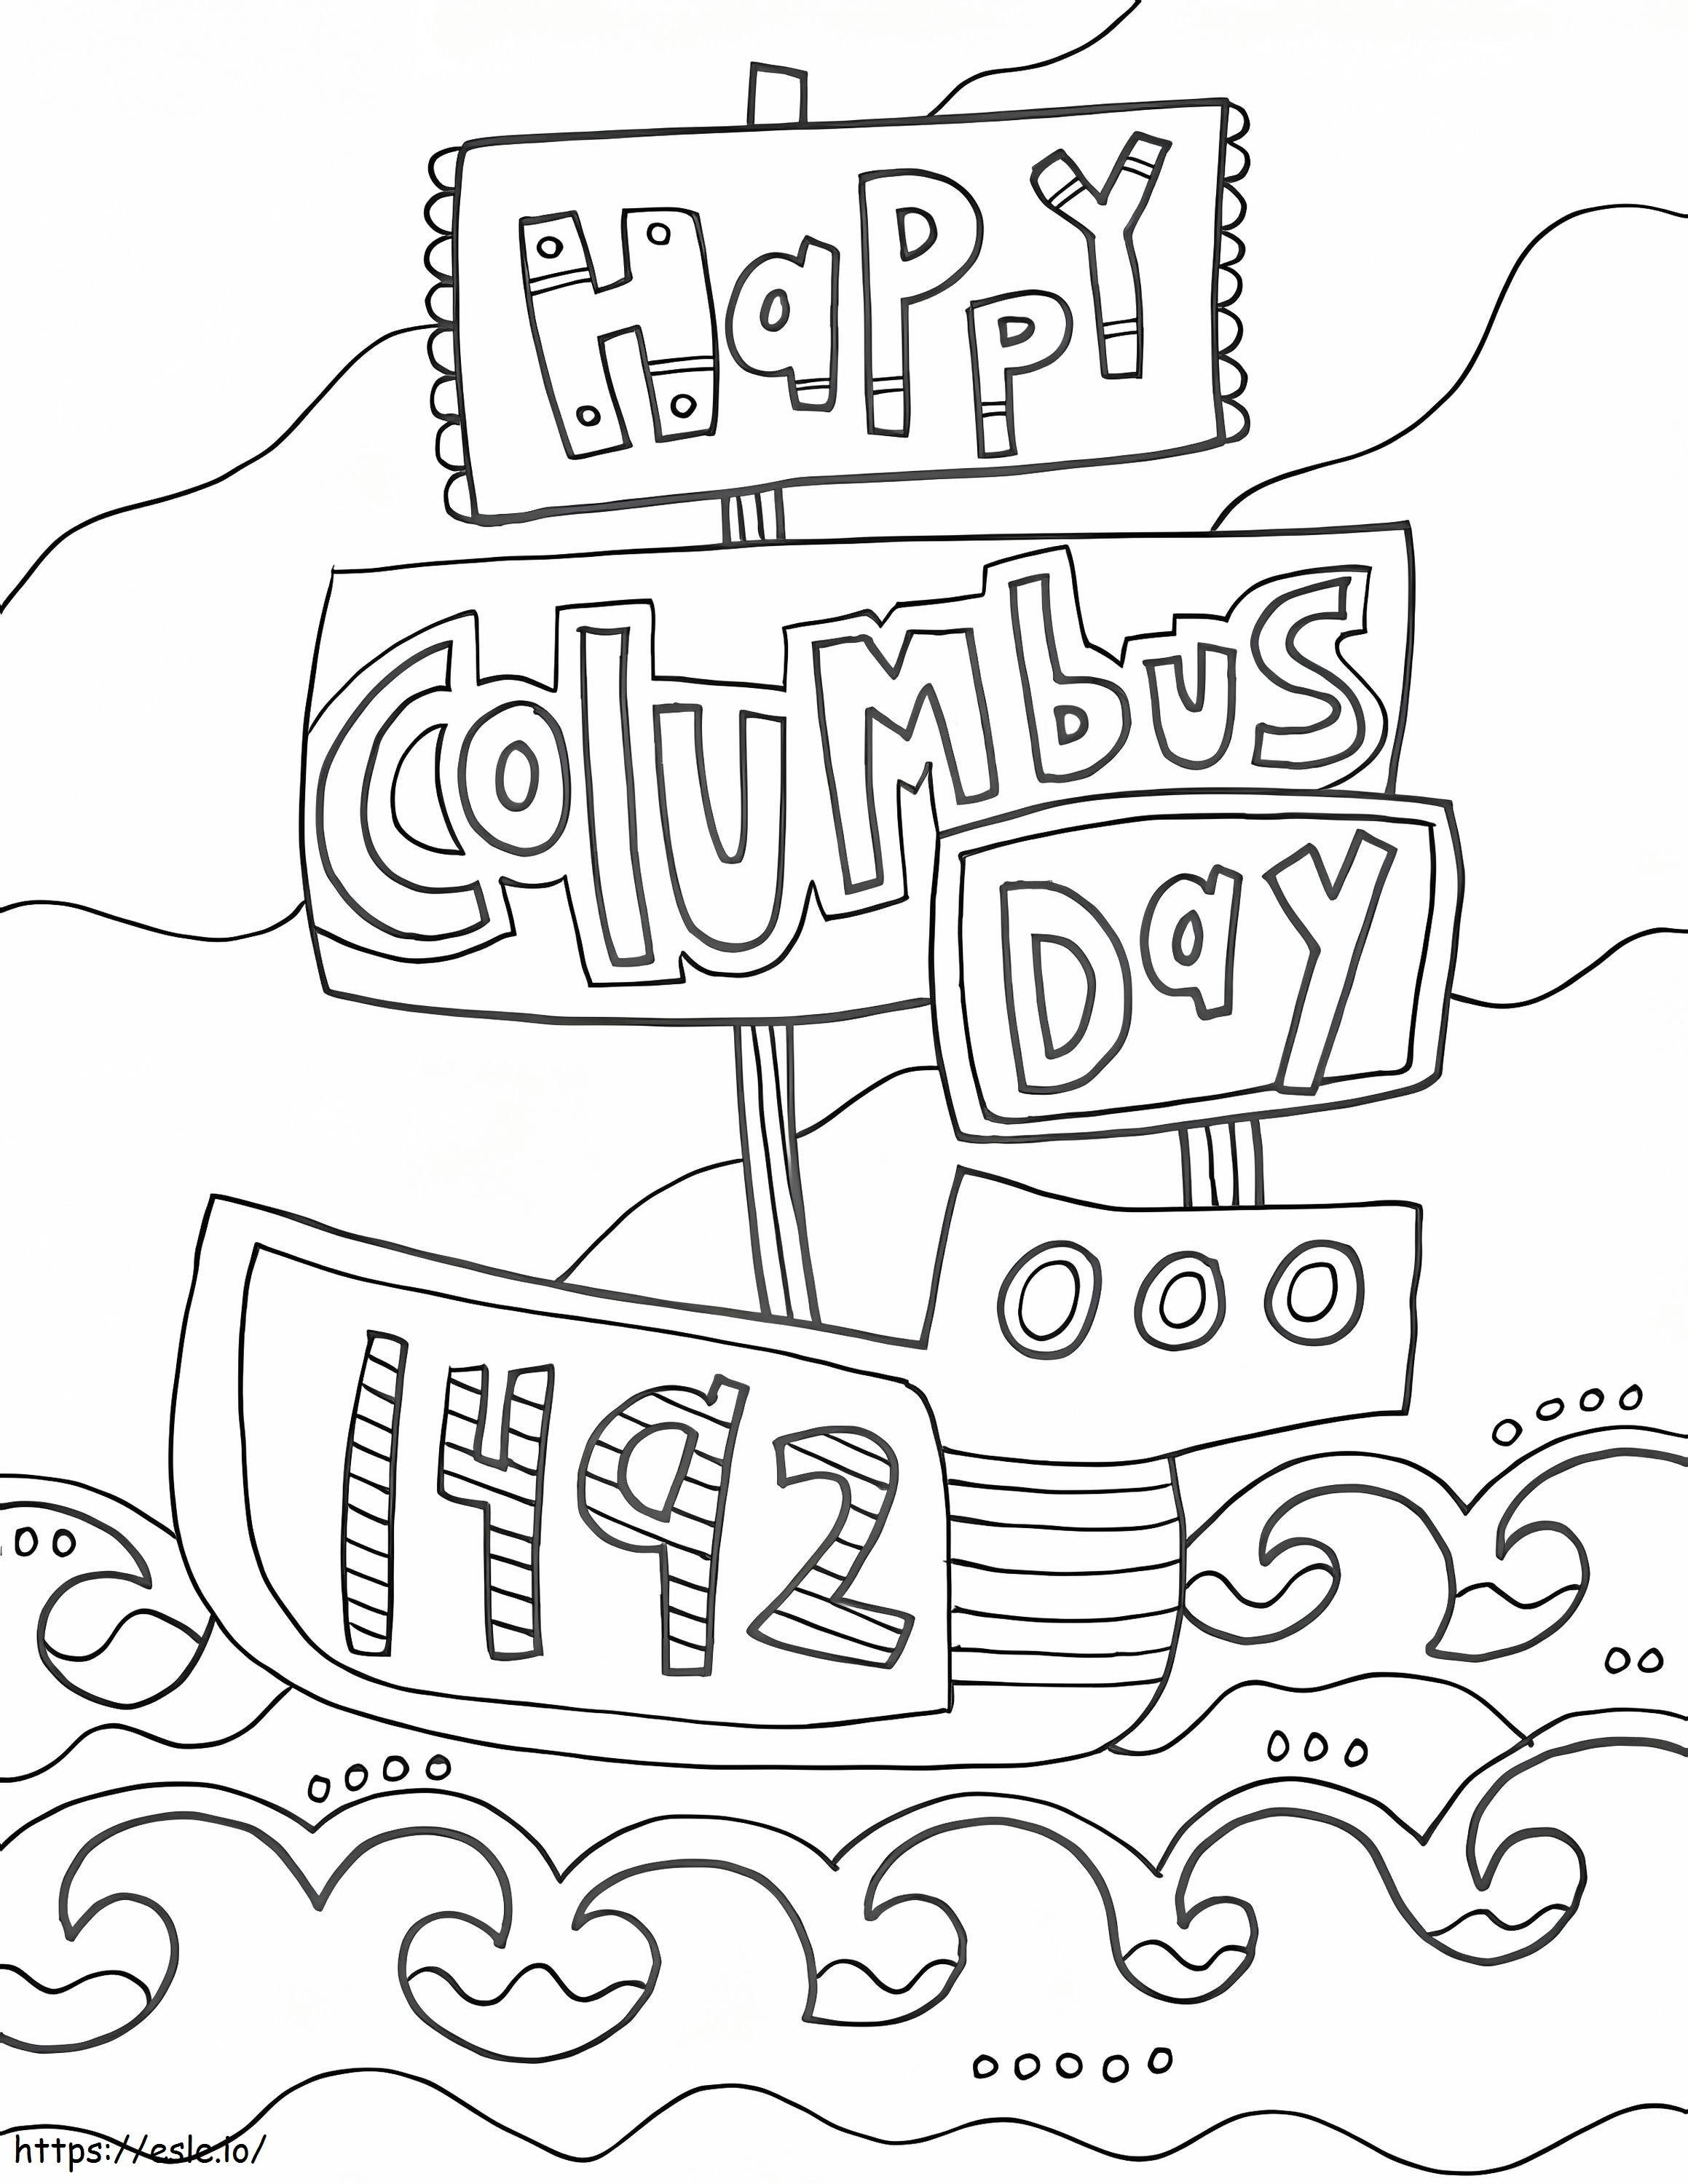 Happy Columbus Day 1 coloring page